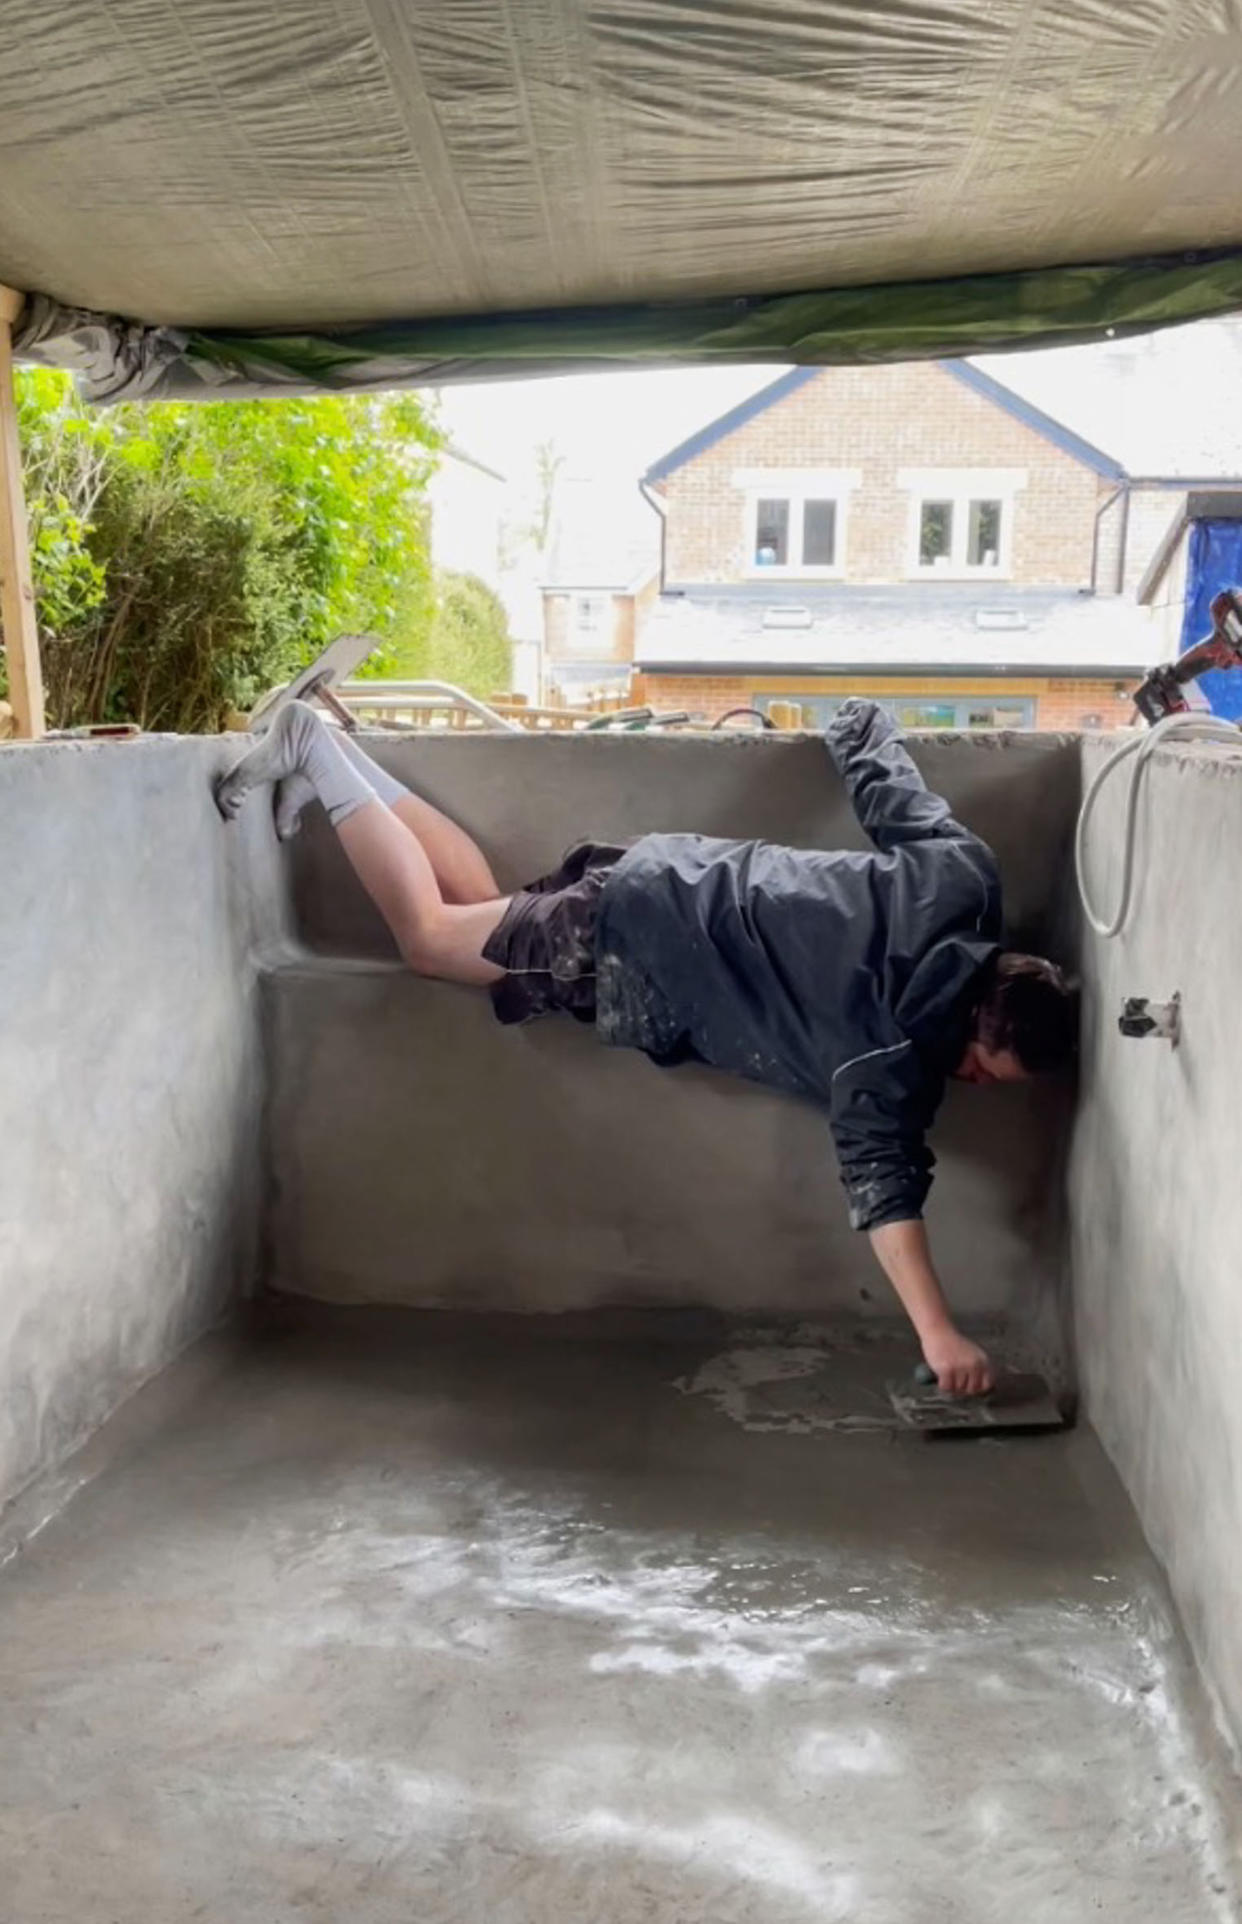 A dad has found a unique way to beat the heatThe swimming pool in Alex's gardenwave - after building a SWIMMING POOL in his back garden - entirely using YouTube tutorials.Alex Dodman, 36, from Saffron Walden, Essex, dreamt of building a swimming pool in his back garden, and thanks to some handy YouTube videos, he did just that.The ambulance worker has a hand at impressive home DIY projects, but not just your average putting up shelves or hanging a mirror, Alex previously built a home cinema and gym saving Â£75K, with this latest project being his most impressive yet. Moving into his home in 2017 with partner Sarah, 36, a HR manager and their two young children Allie, five, and Eddie, two, Alex has been getting busy renovating the family home, ripping it out and starting over, but saved his biggest project until last - the pool.Claiming that his friends and family are used to his wild ideas, Alex underestimated how tough this one would really be, building the pool entirely by himself. SEE CATERS COPY .